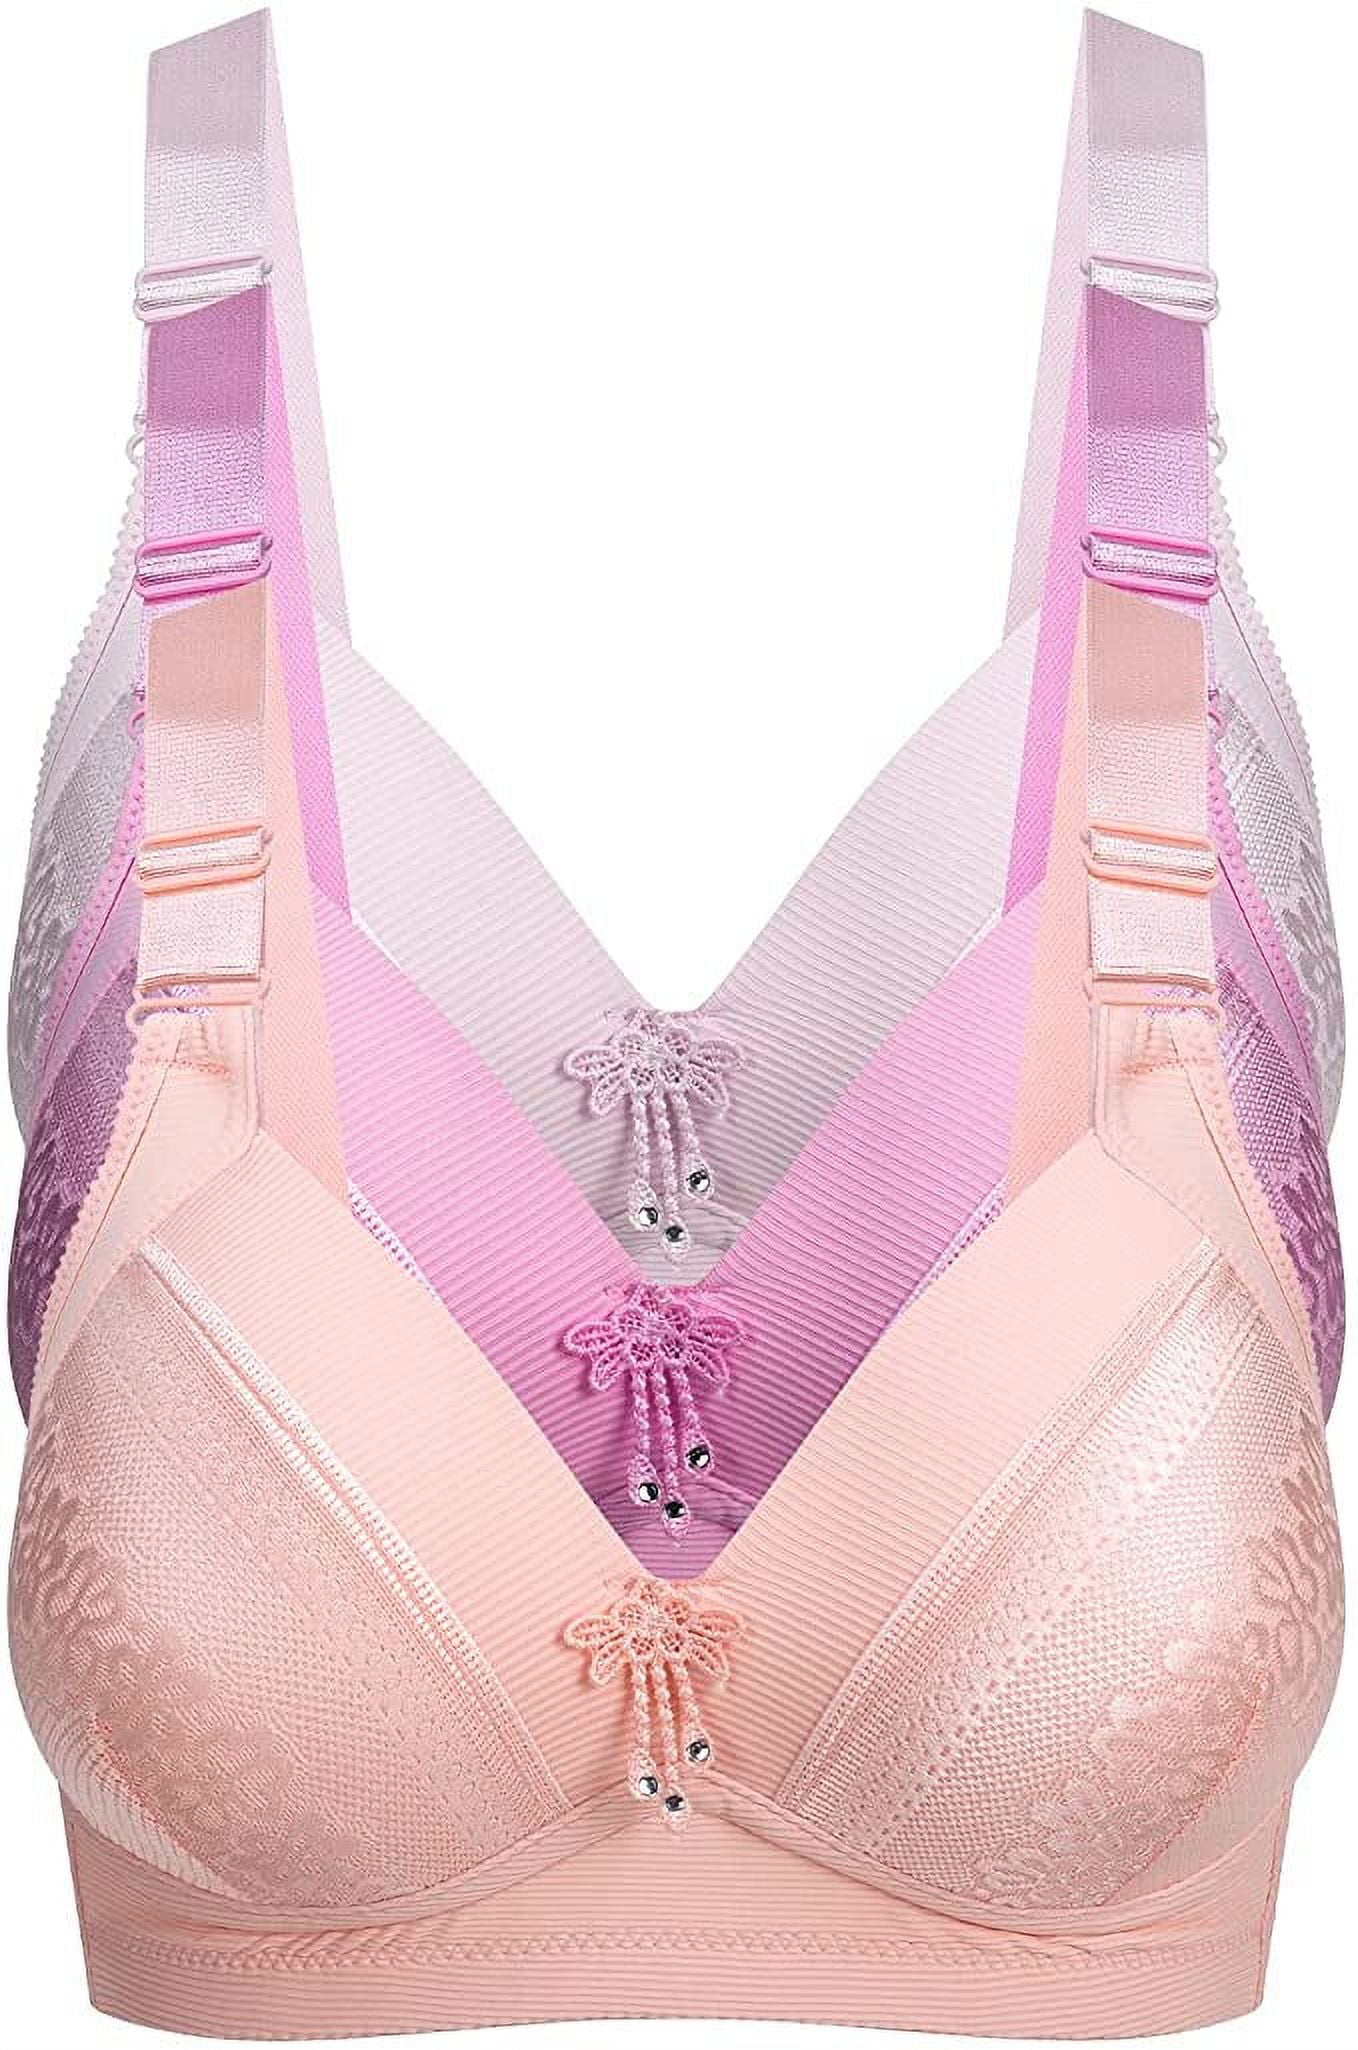  Feeding Bra Non Paded Comfirtable For Women Pack Of 3 Multicolor  /